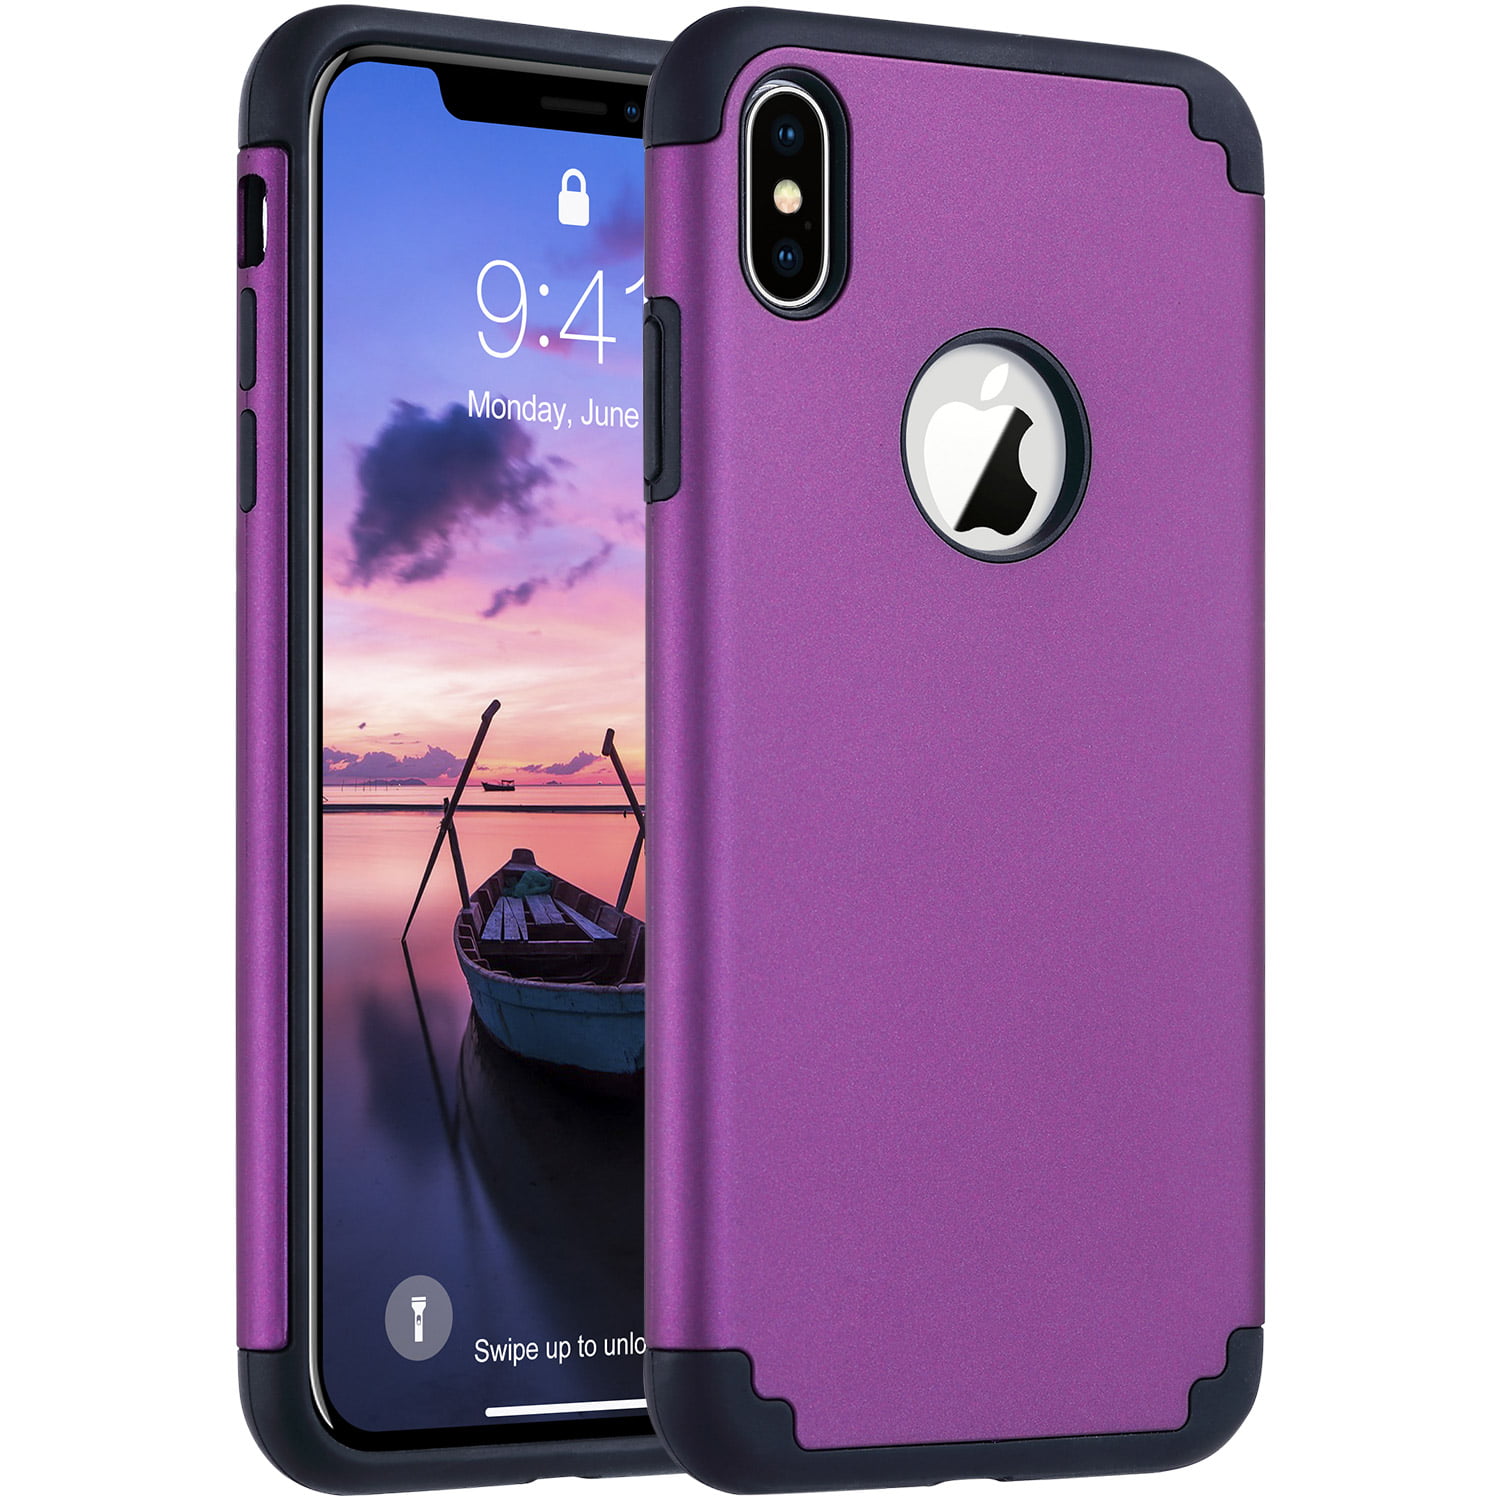 Ulak Slim Protective Case For Iphone Xs Max Hybrid Soft Silicone